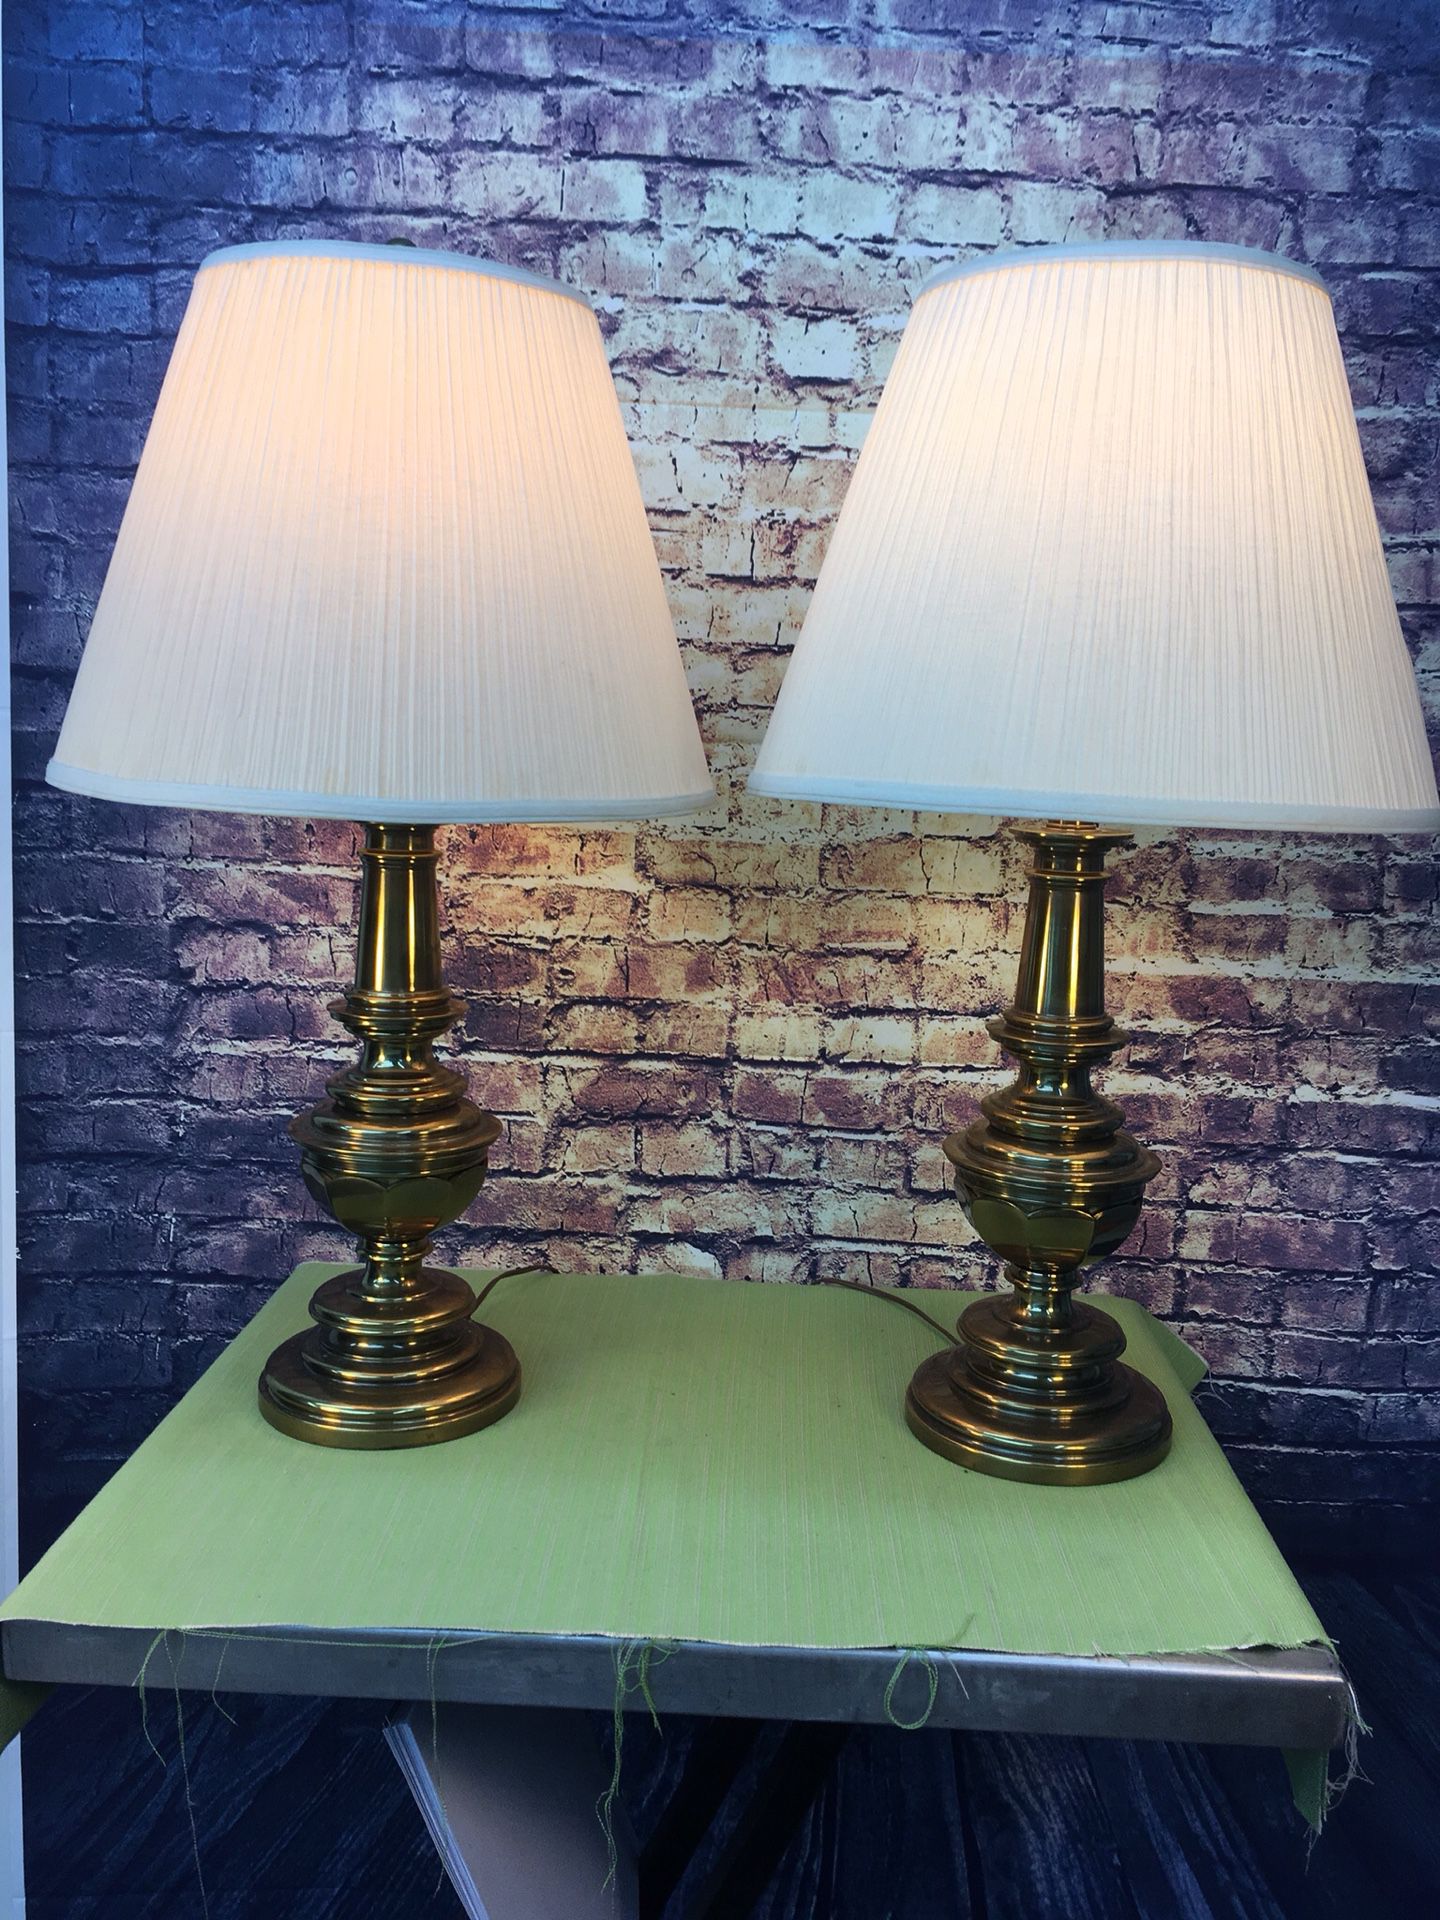 vintage matching stiffel table lamps with antique brass finish & three way light switch.